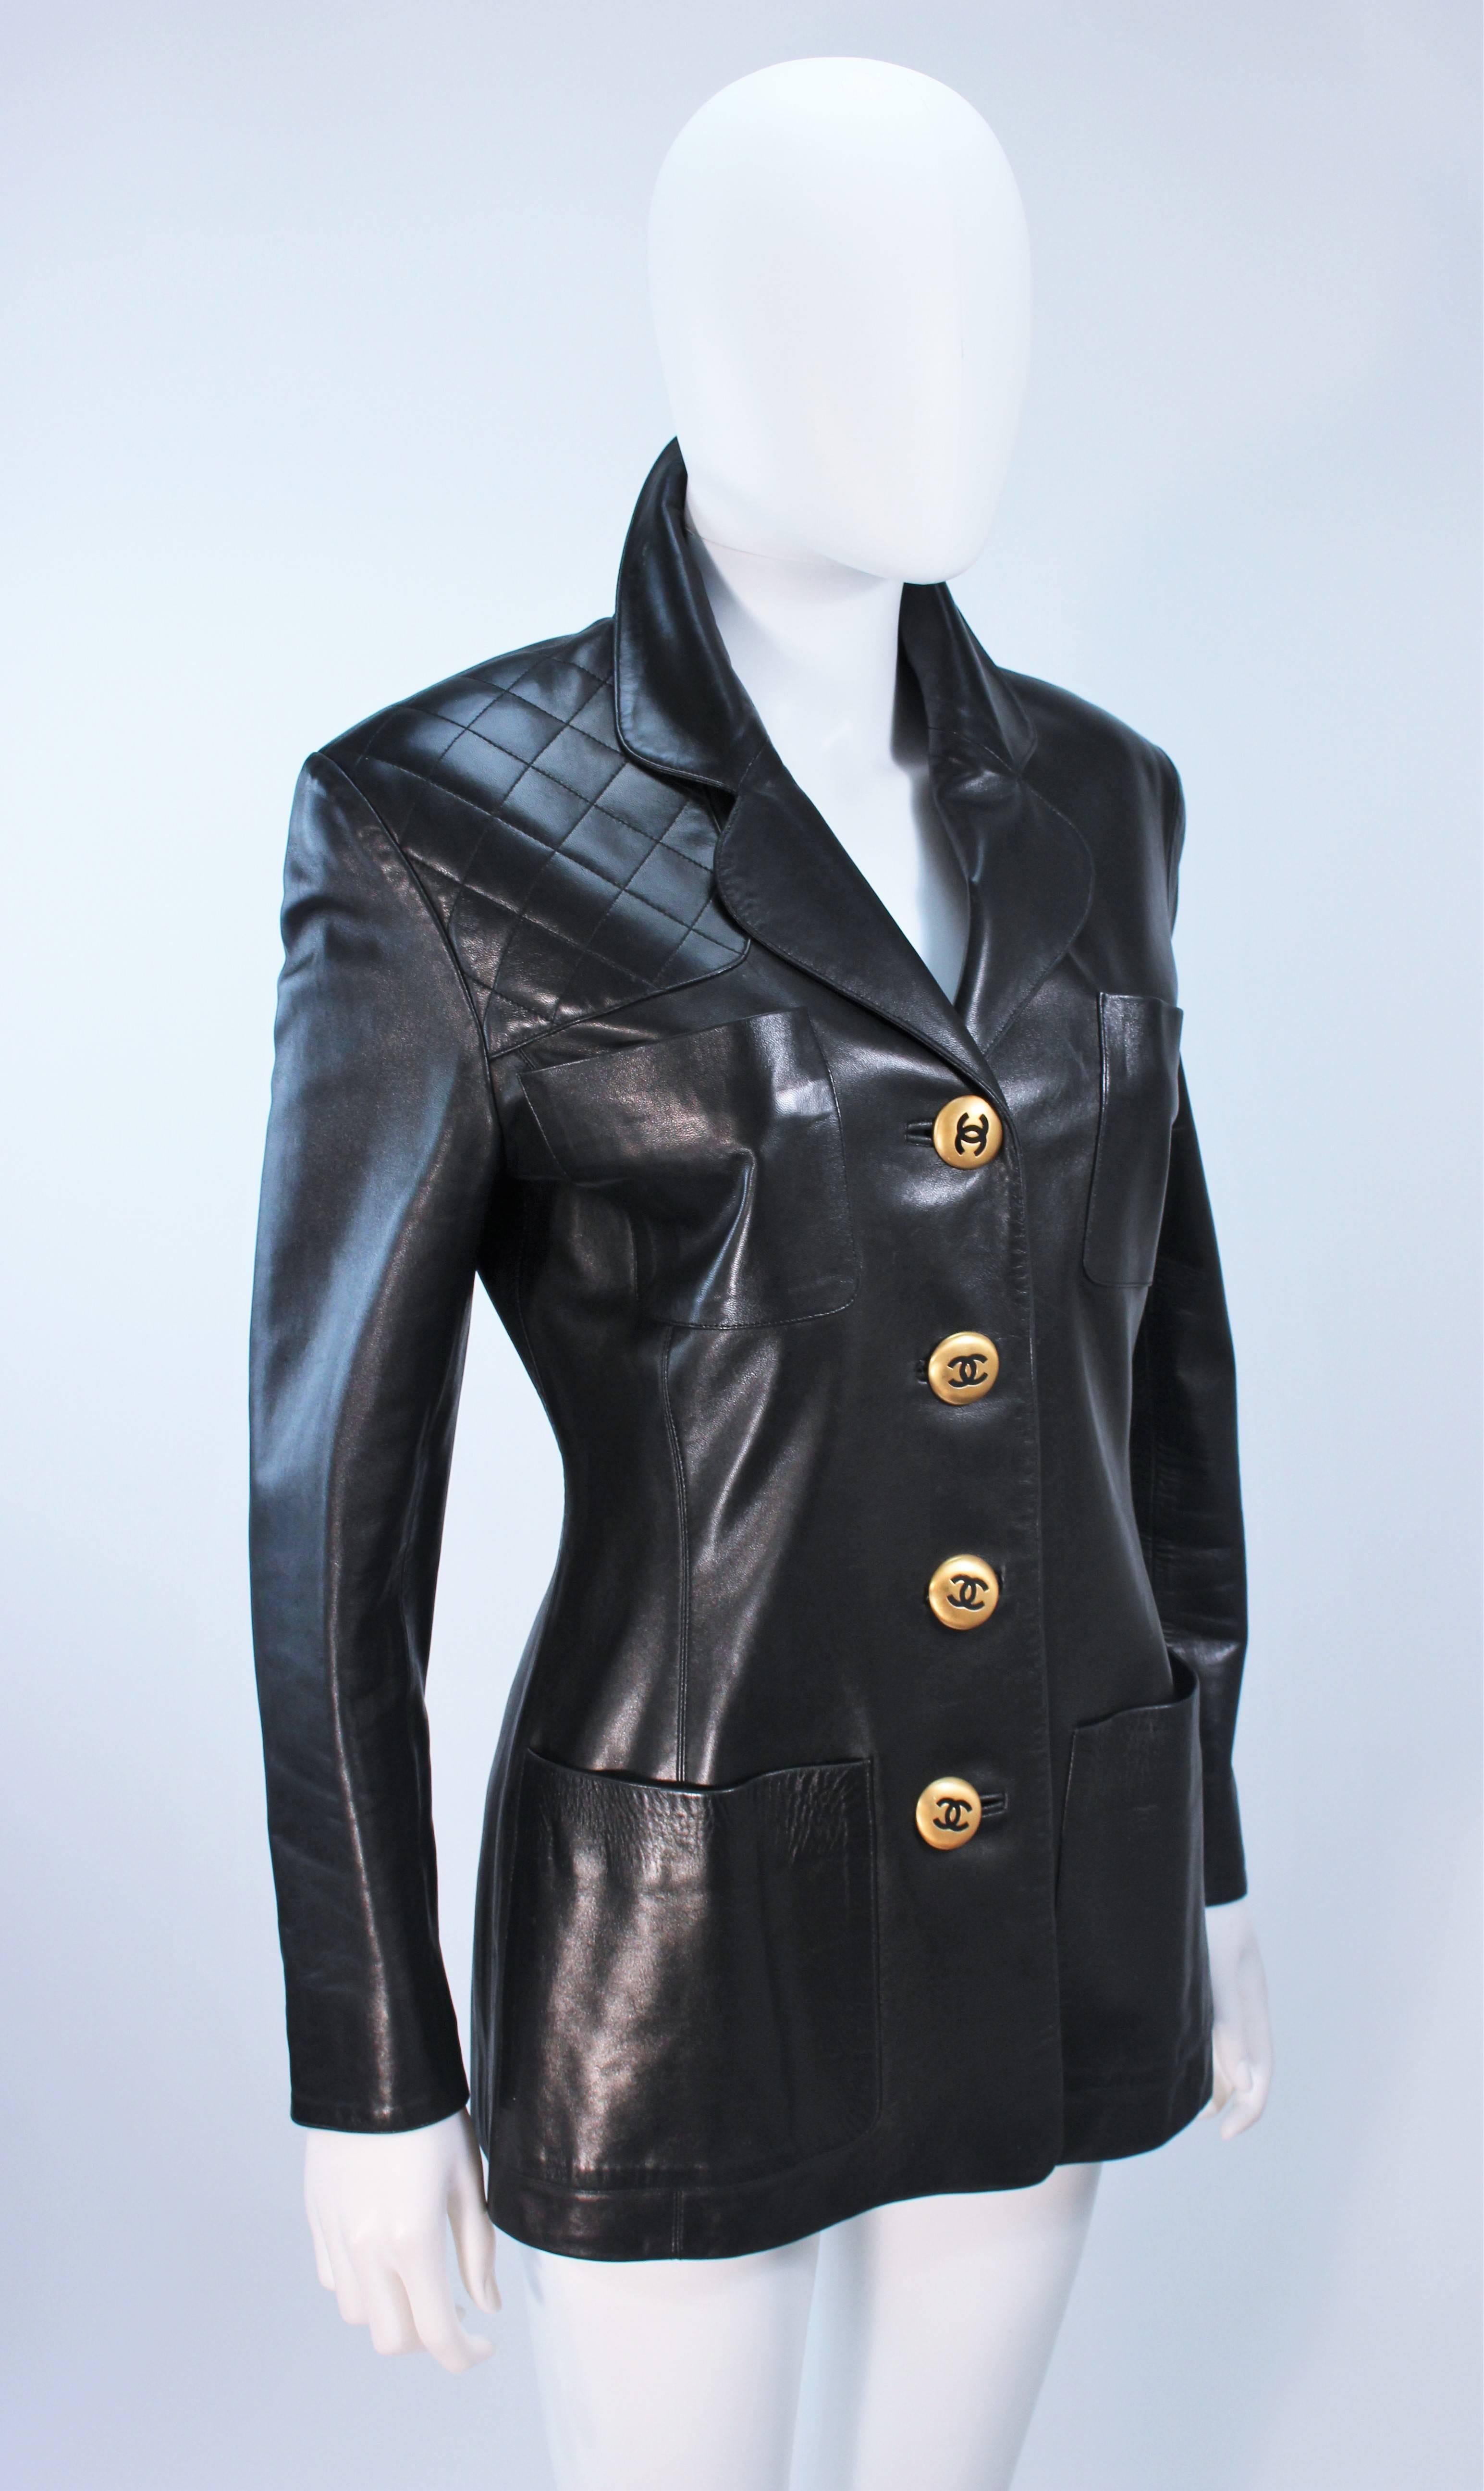 CHANEL Black Leather Jacket with Quilted Accent and Gold Buttons Size 8 ...